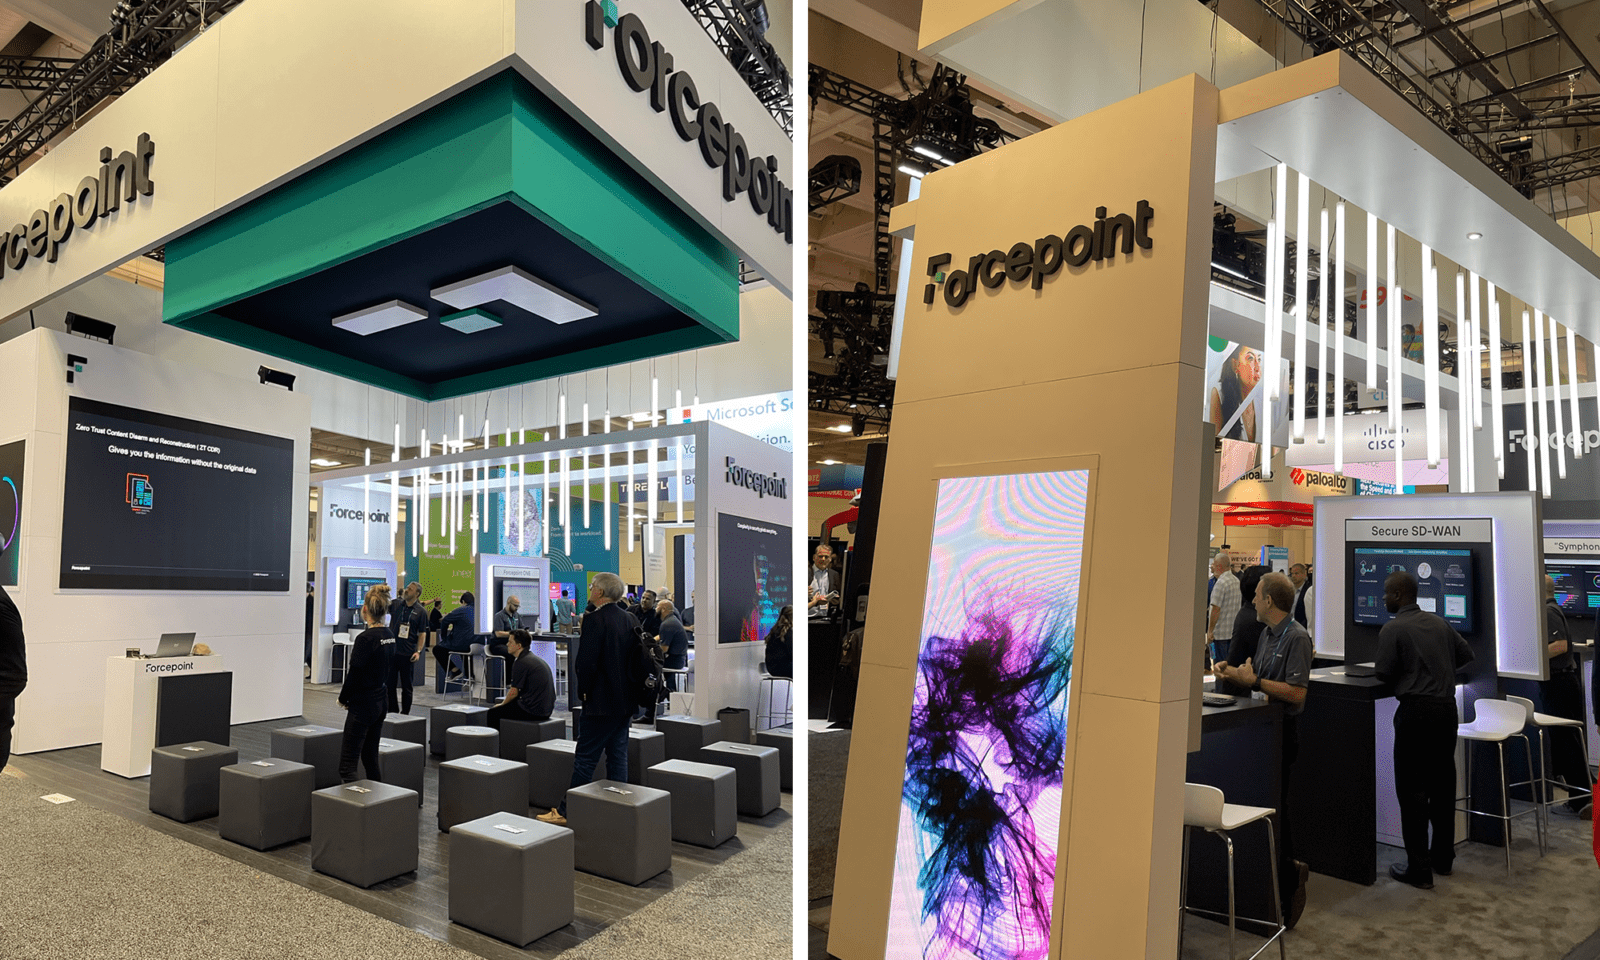 Forcepoint's exhibit had neat hanging lights and an overall strong architecture